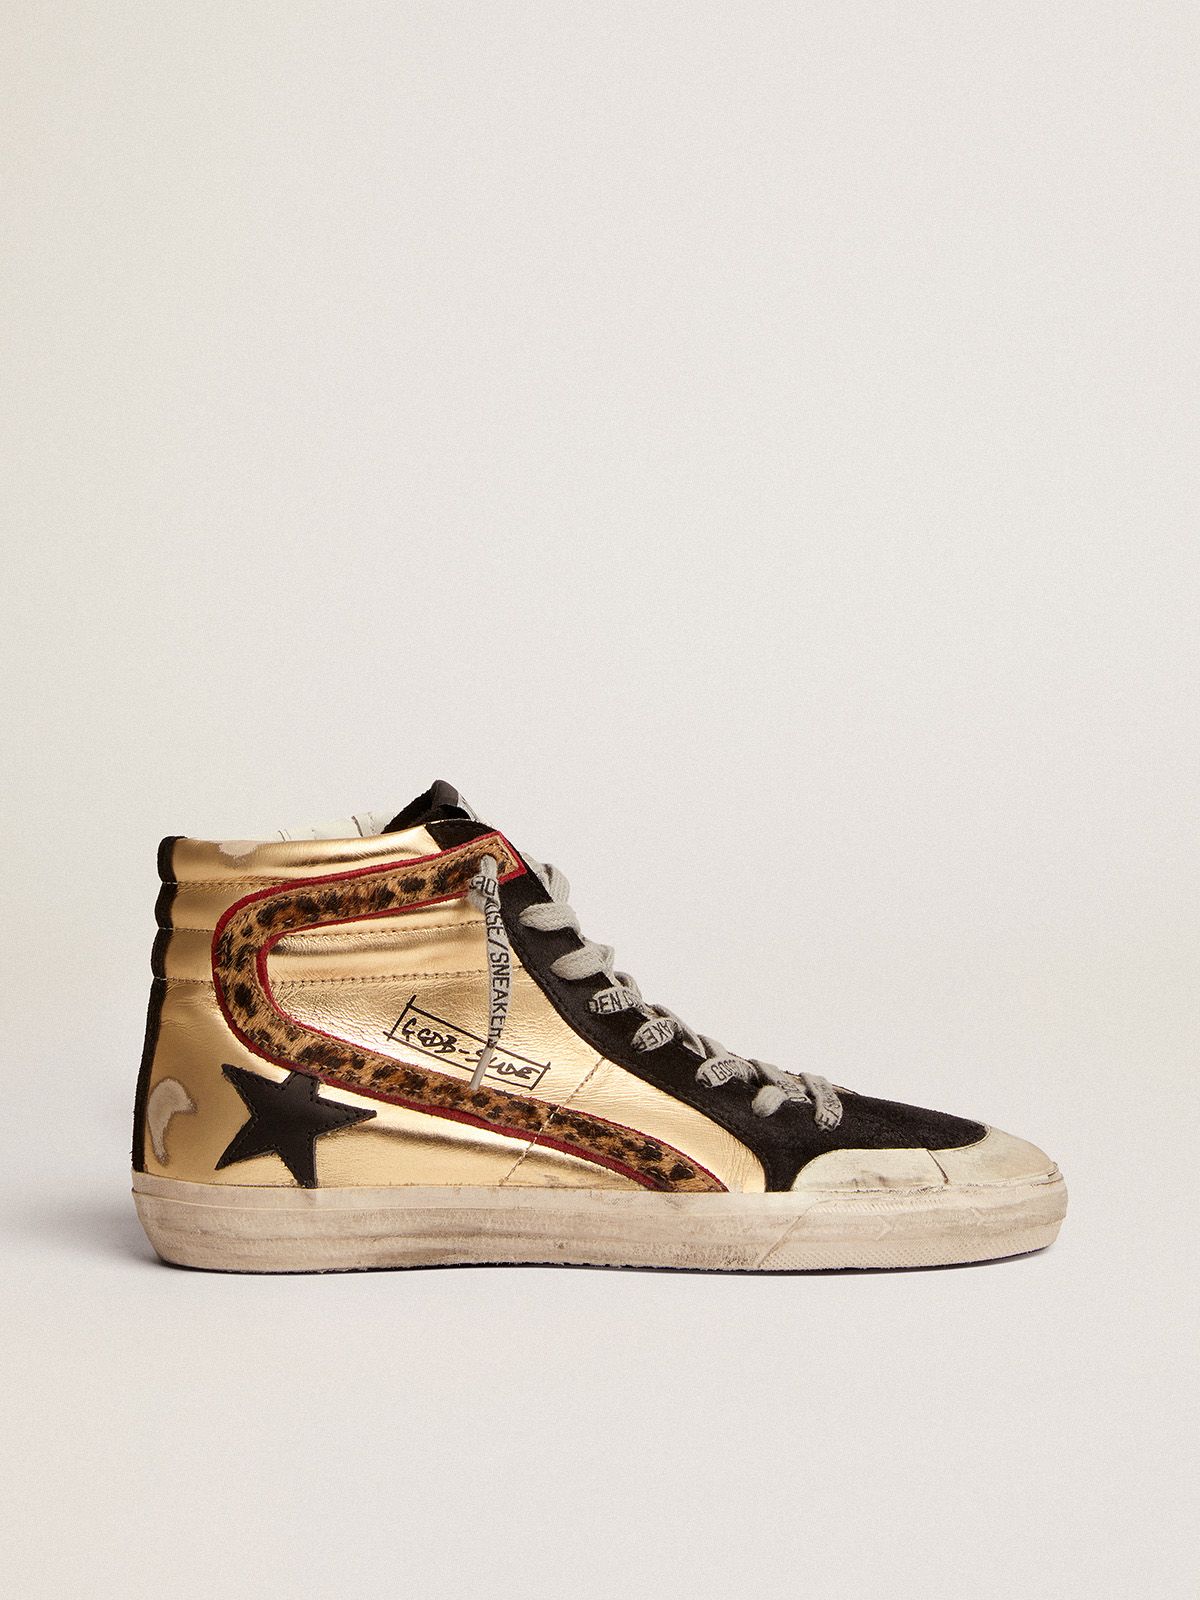 golden goose Penstar gold leather with in sneakers insert star Slide leopard-print black and skin pony